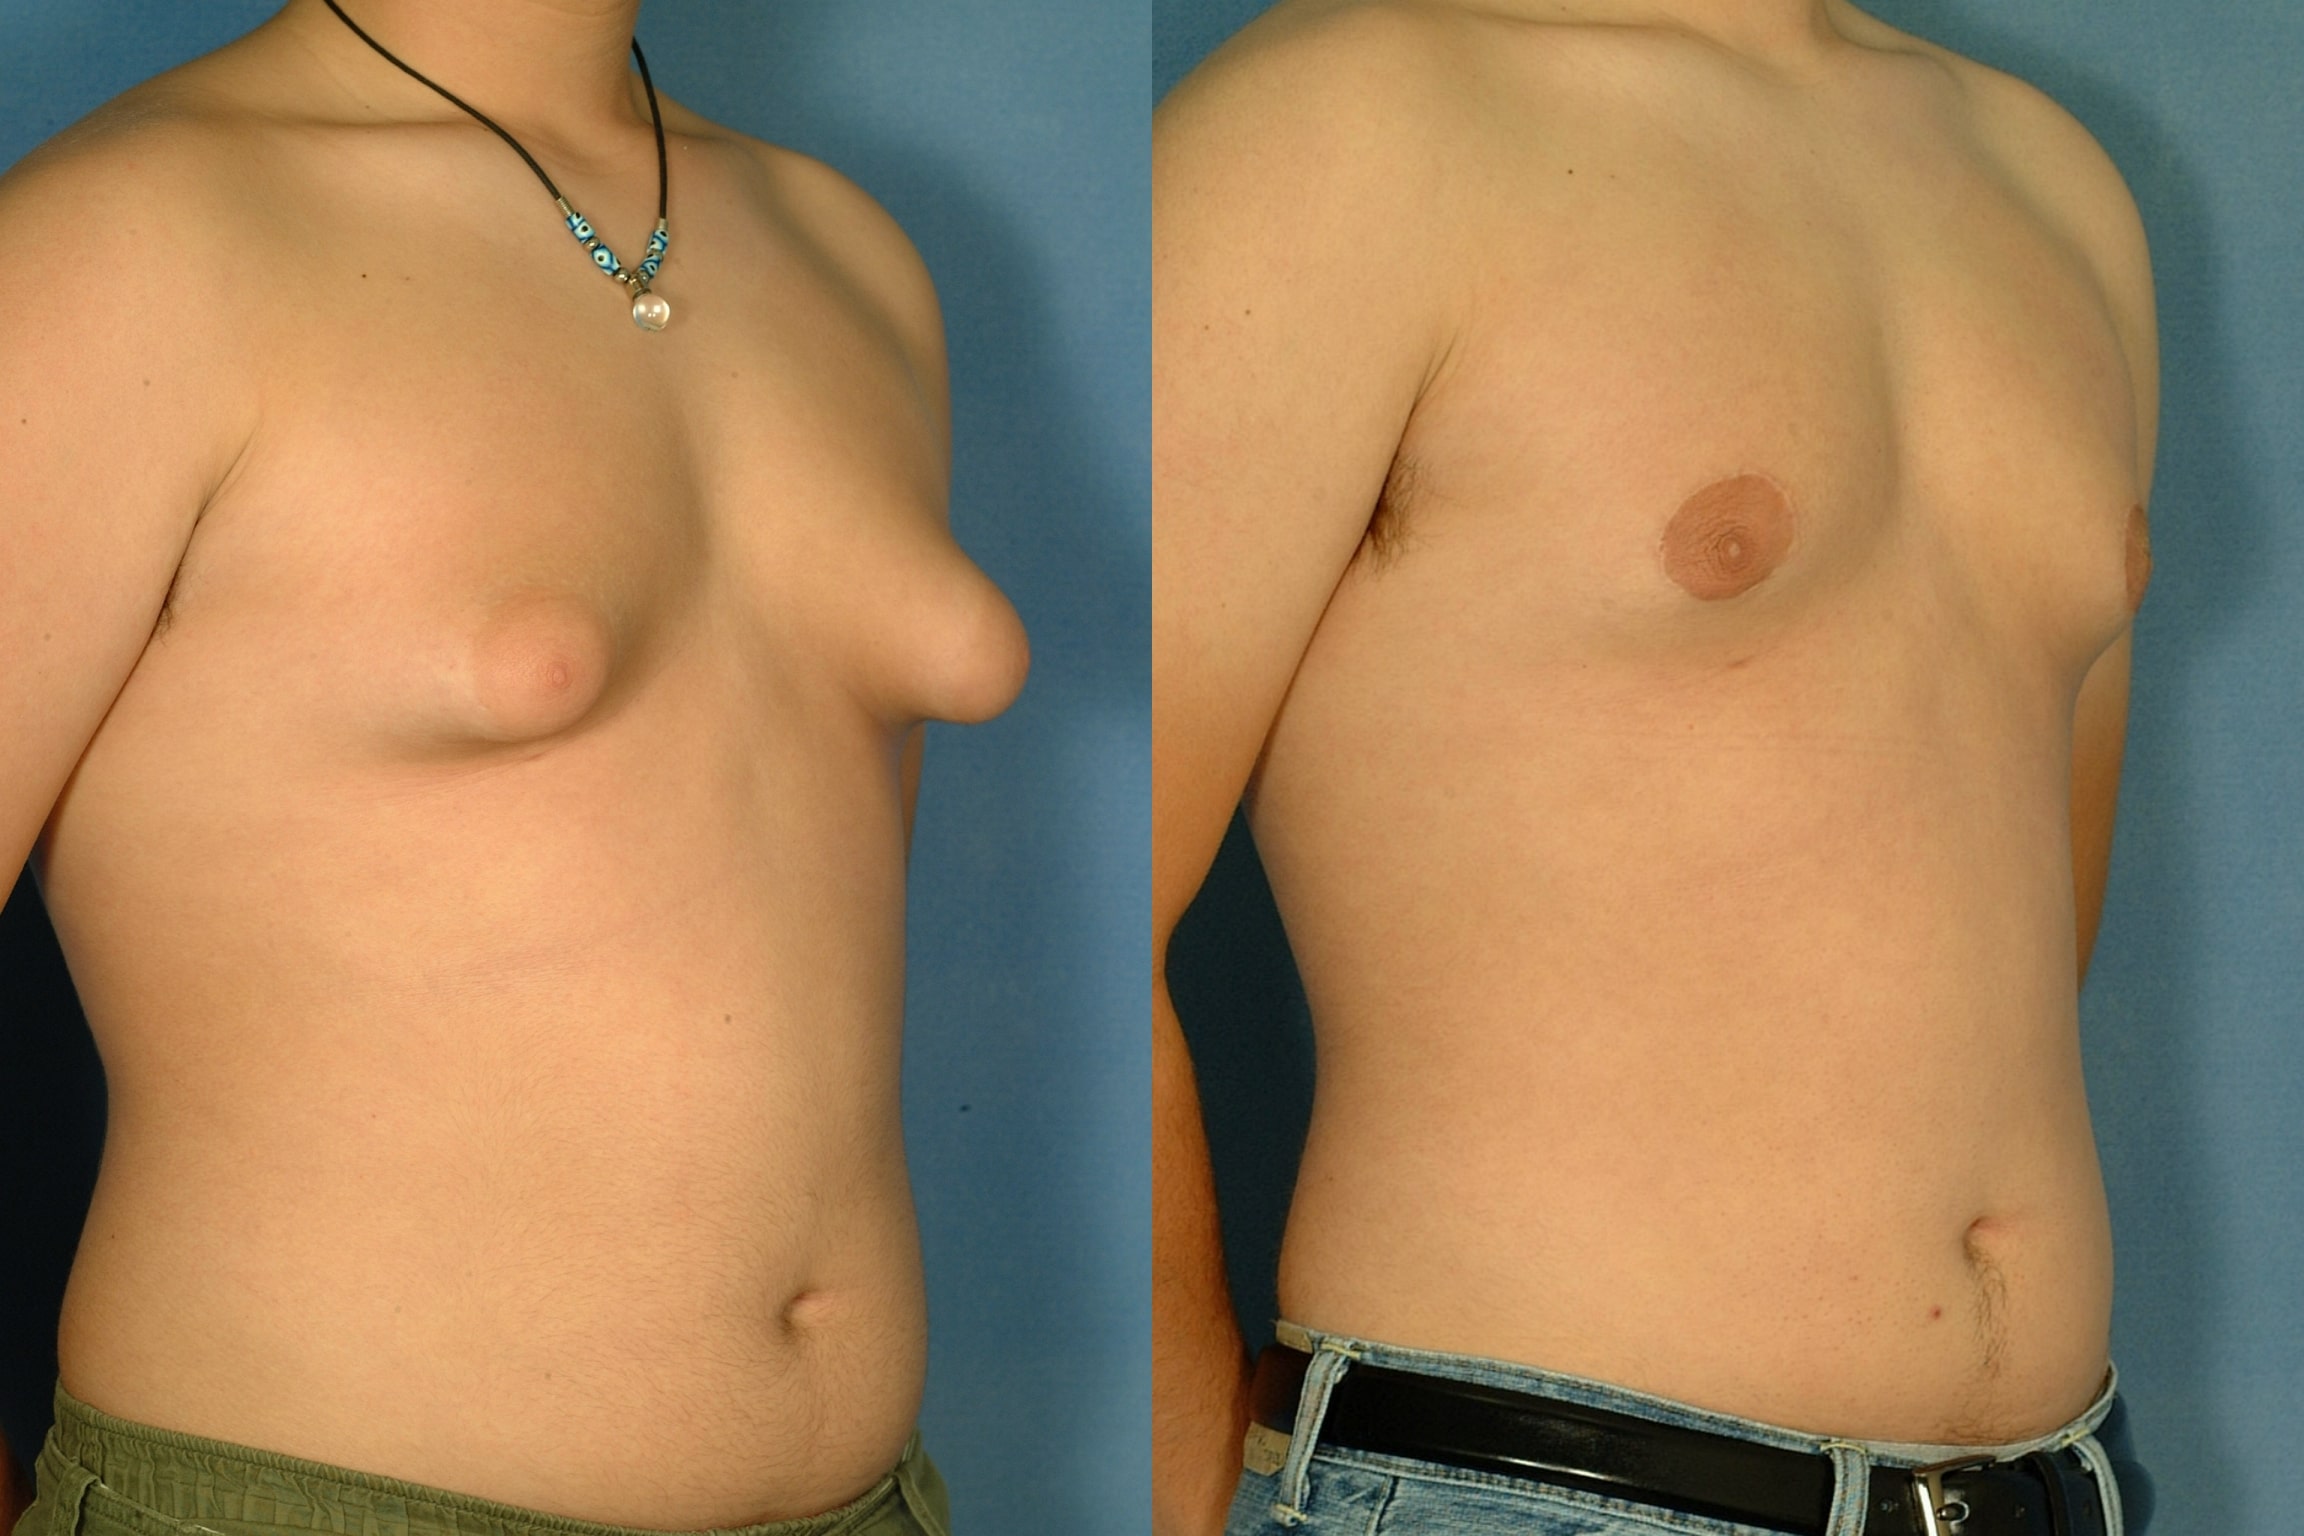 Gynecomastia Surgery: Addressing Common Concerns and FAQs